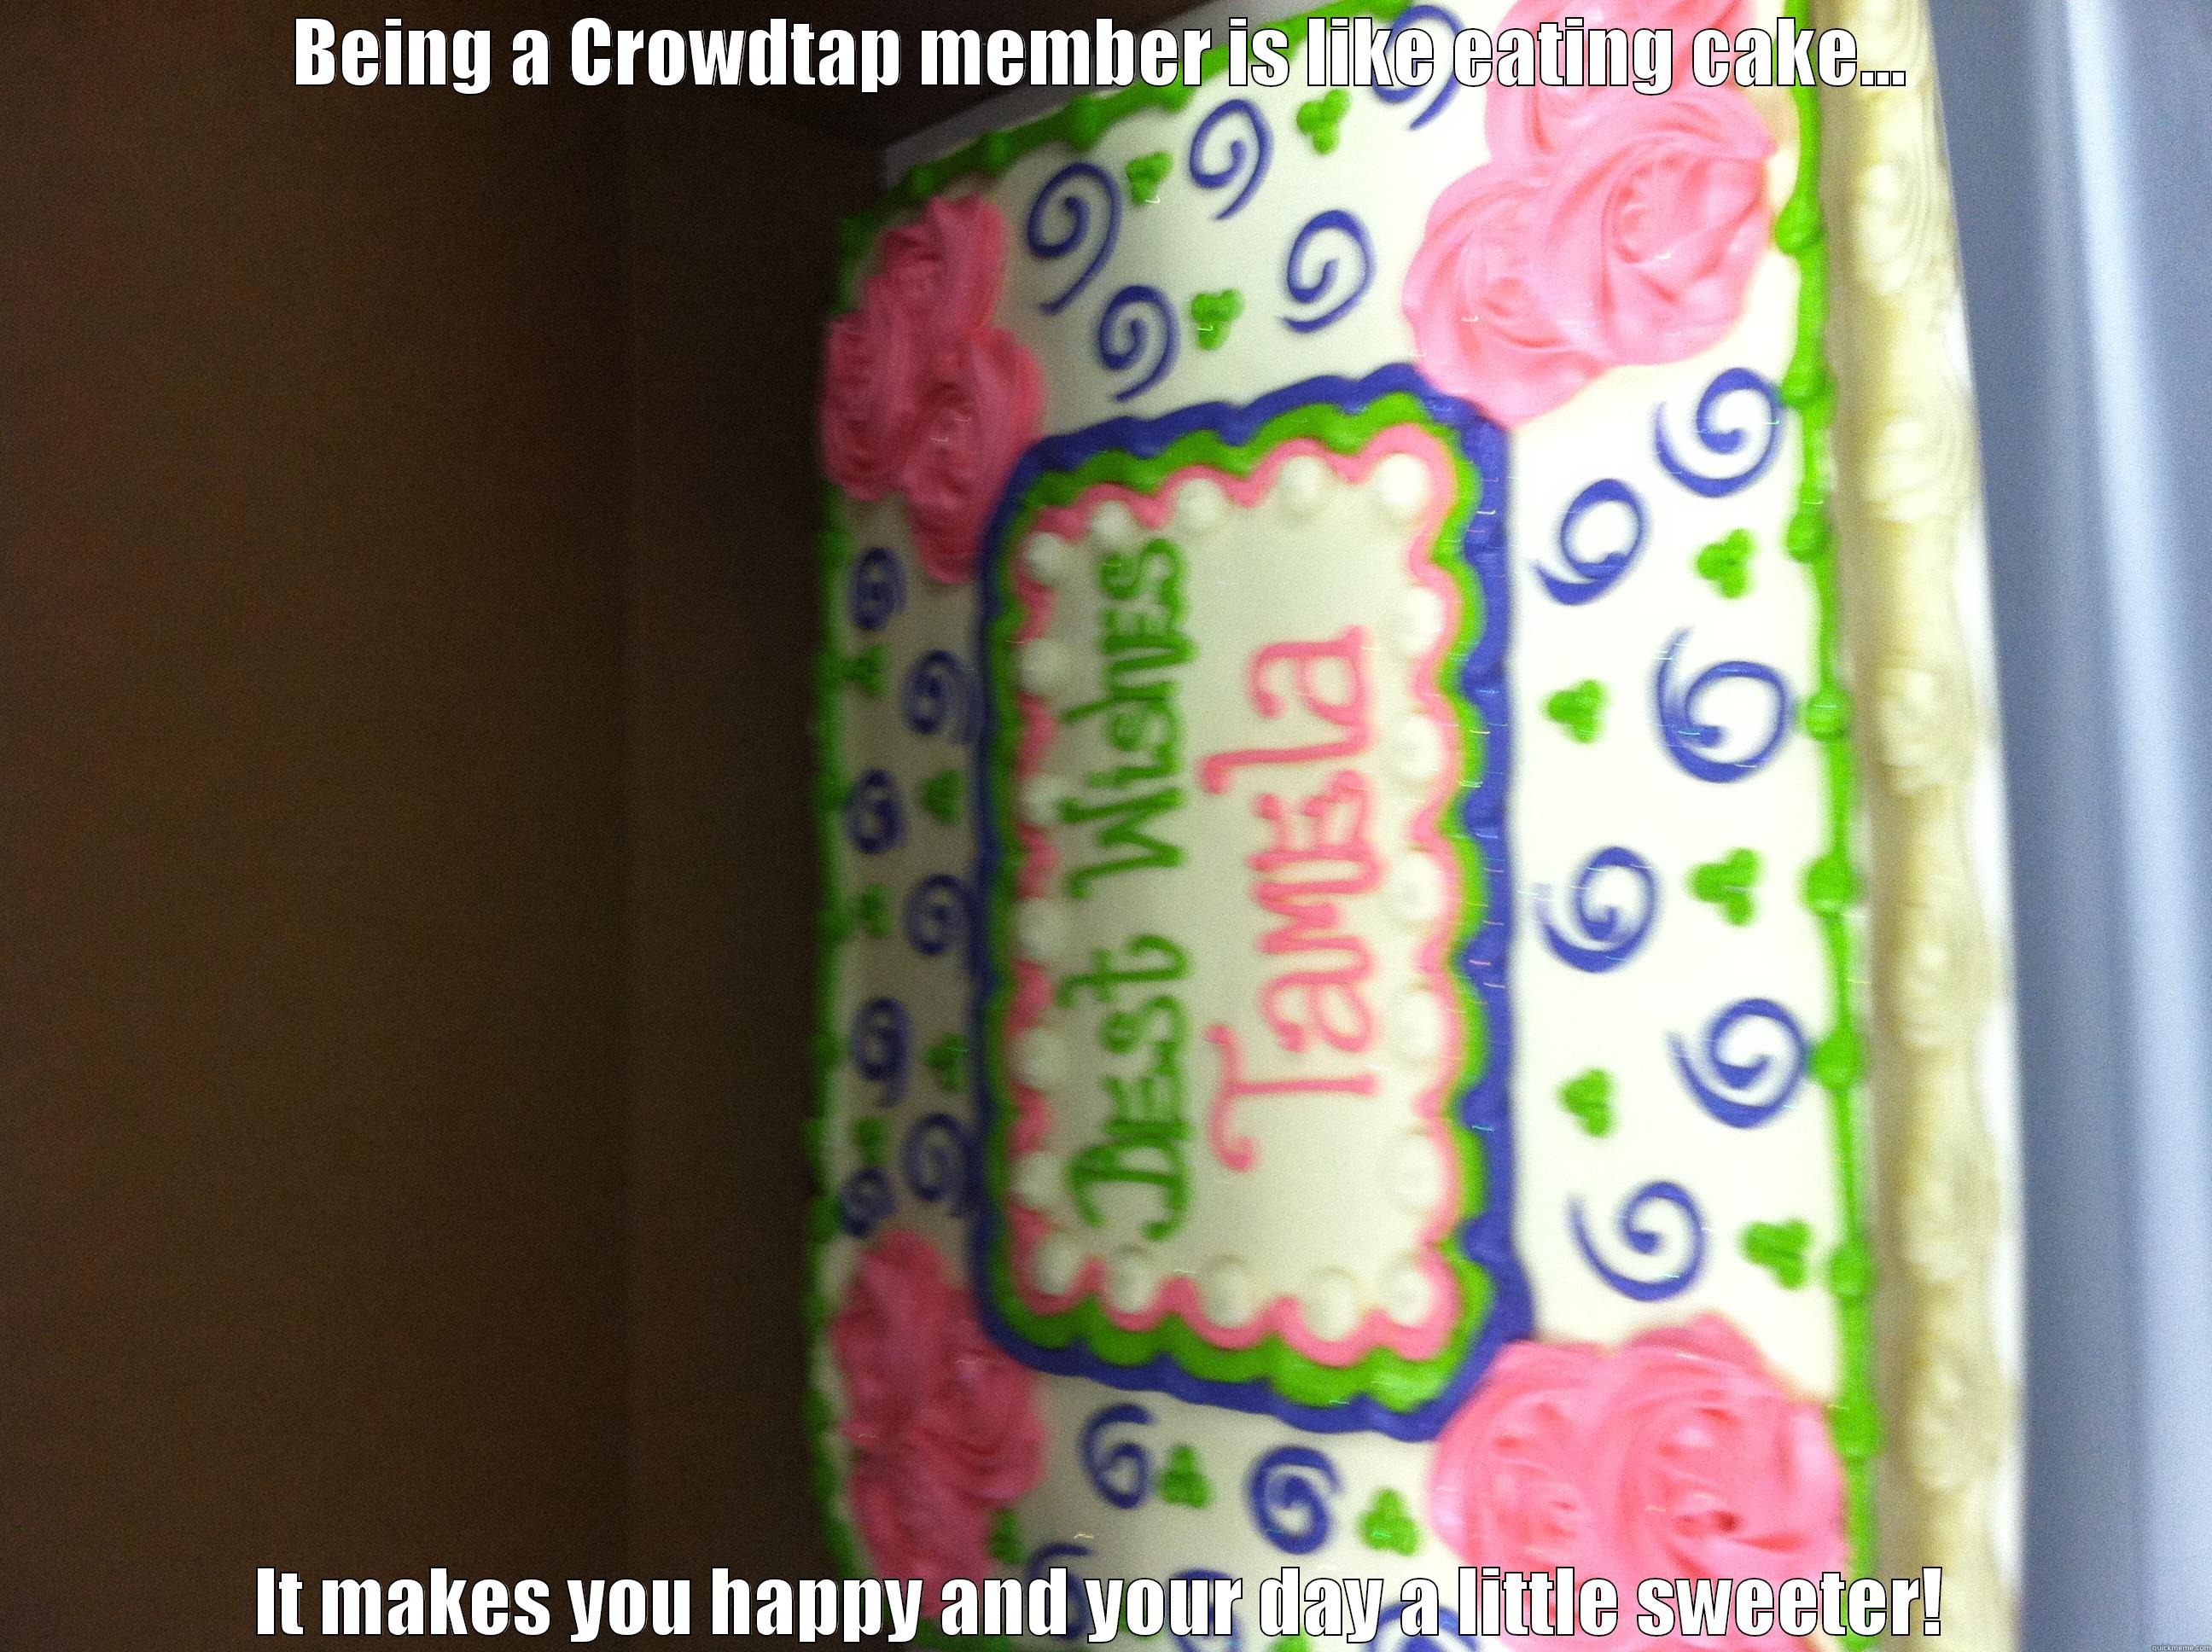 BEING A CROWDTAP MEMBER IS LIKE EATING CAKE... IT MAKES YOU HAPPY AND YOUR DAY A LITTLE SWEETER! Misc